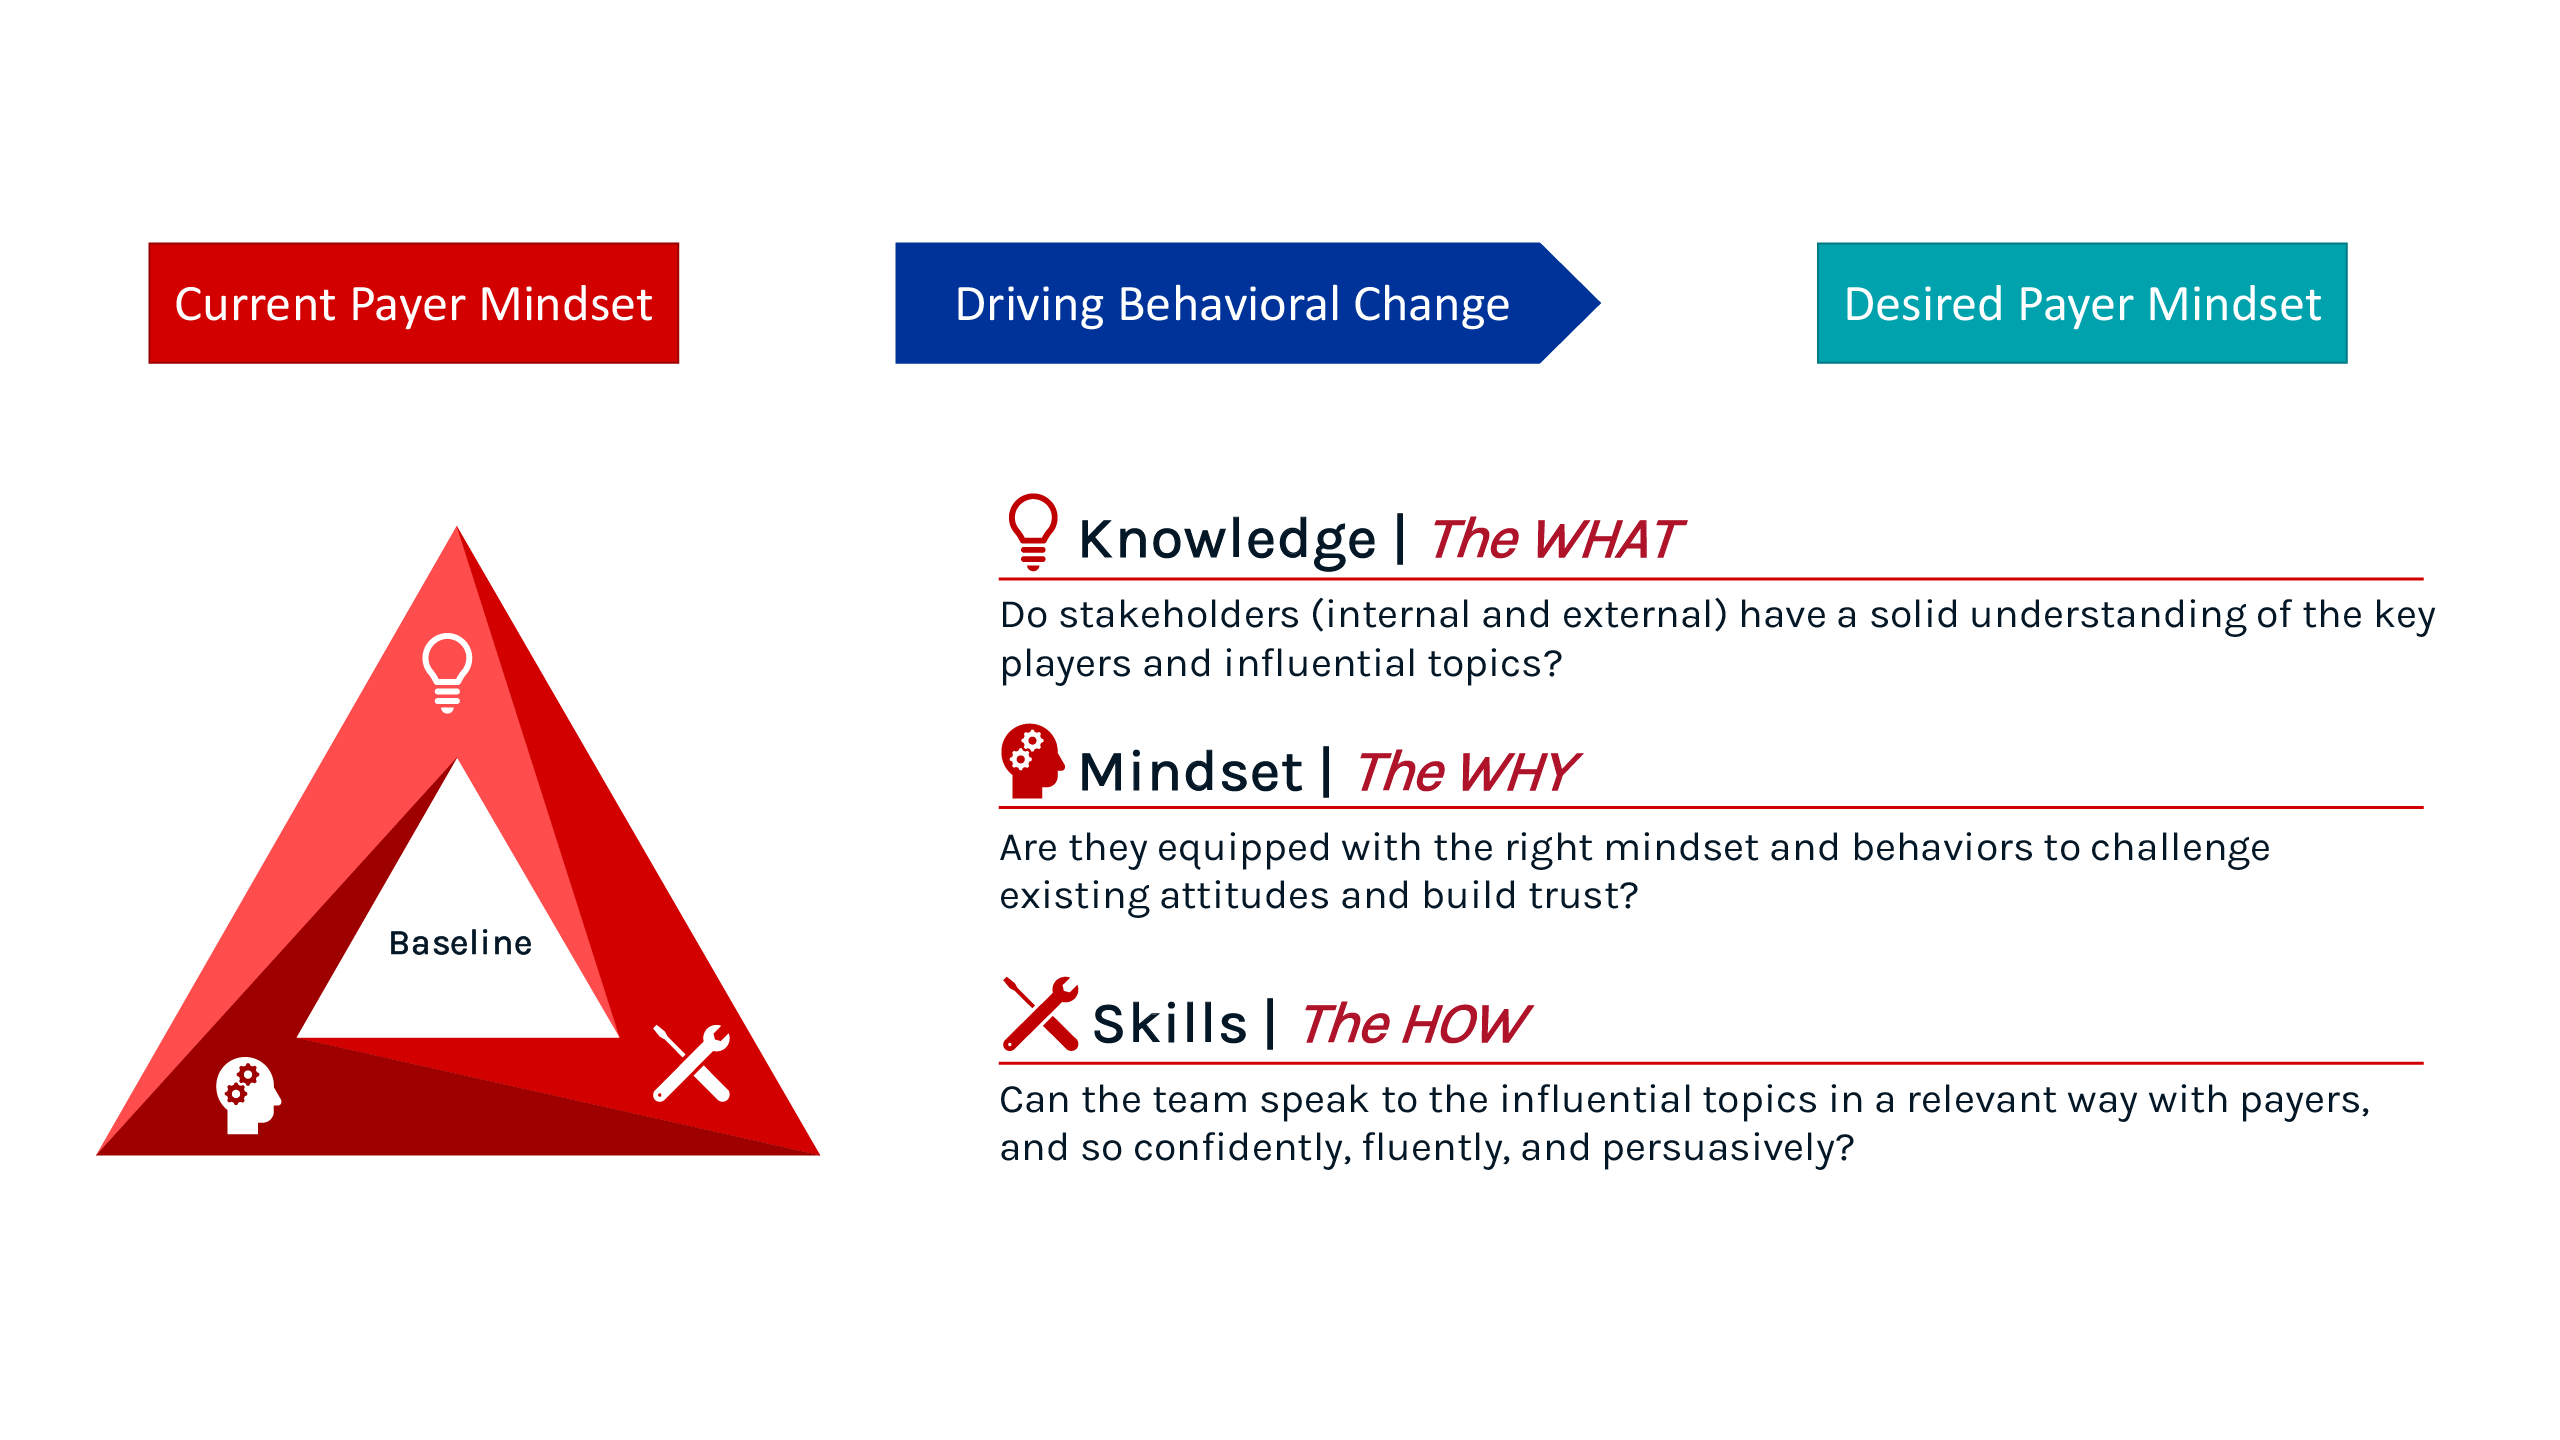 Graphic Showing a red triangle with each corner representing a component of the Current Payer Mindset: Knowledge, Mindset, and Skills